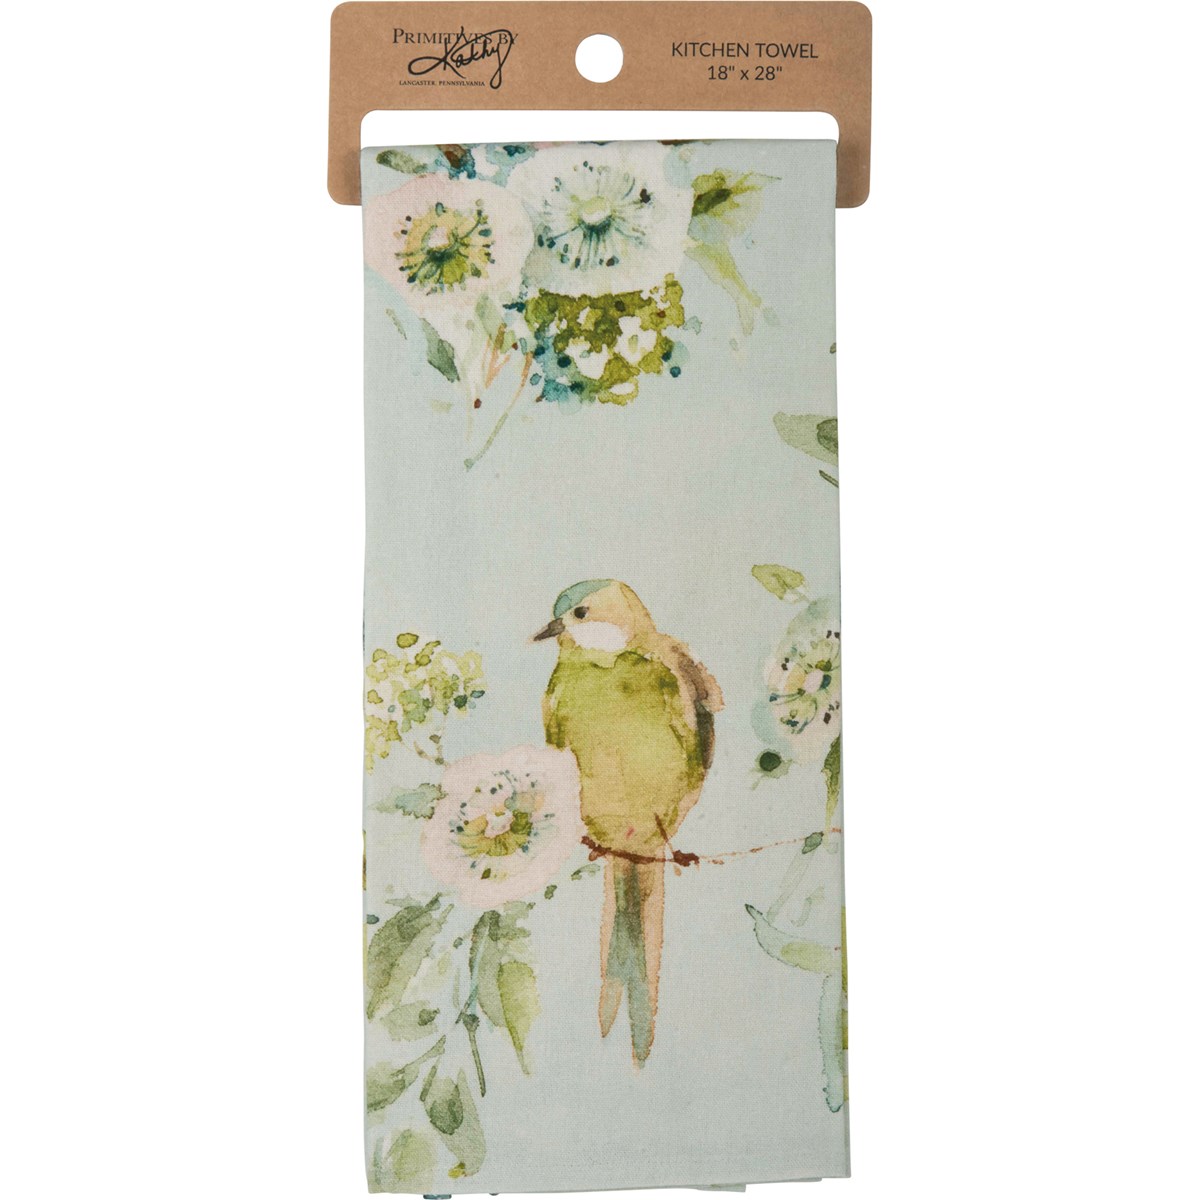 Bird And Floral Kitchen Towel - Cotton